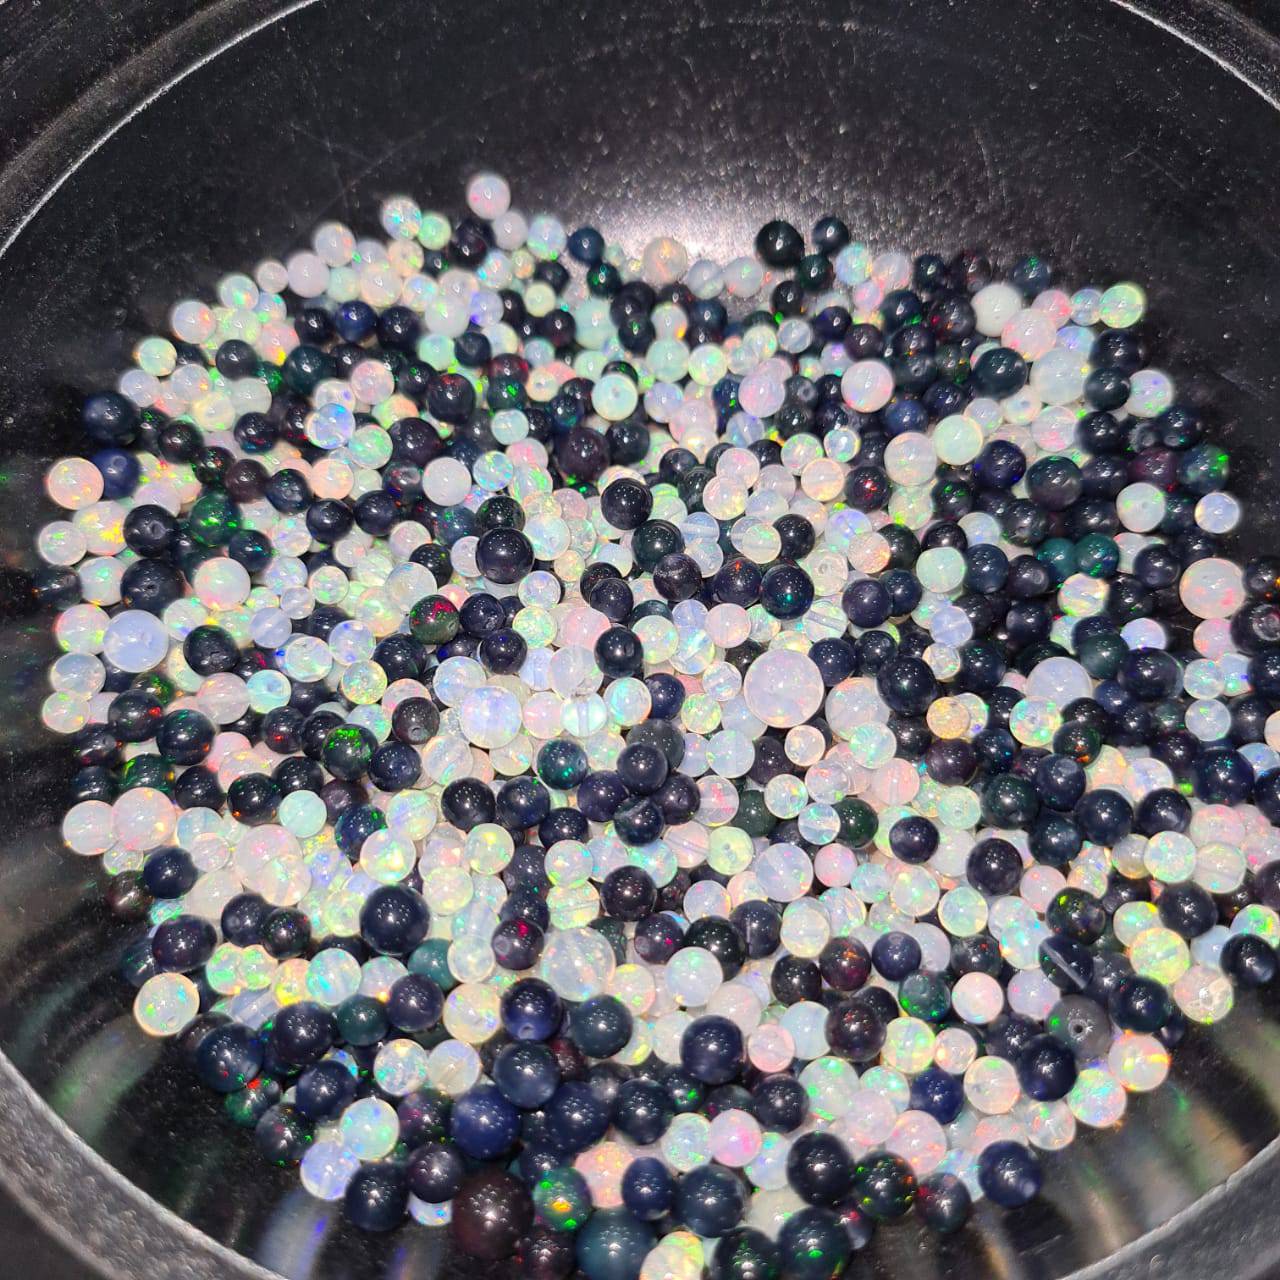 10 Cts Opal Sphere Beads Mix Of Clear and Black Opals - The LabradoriteKing